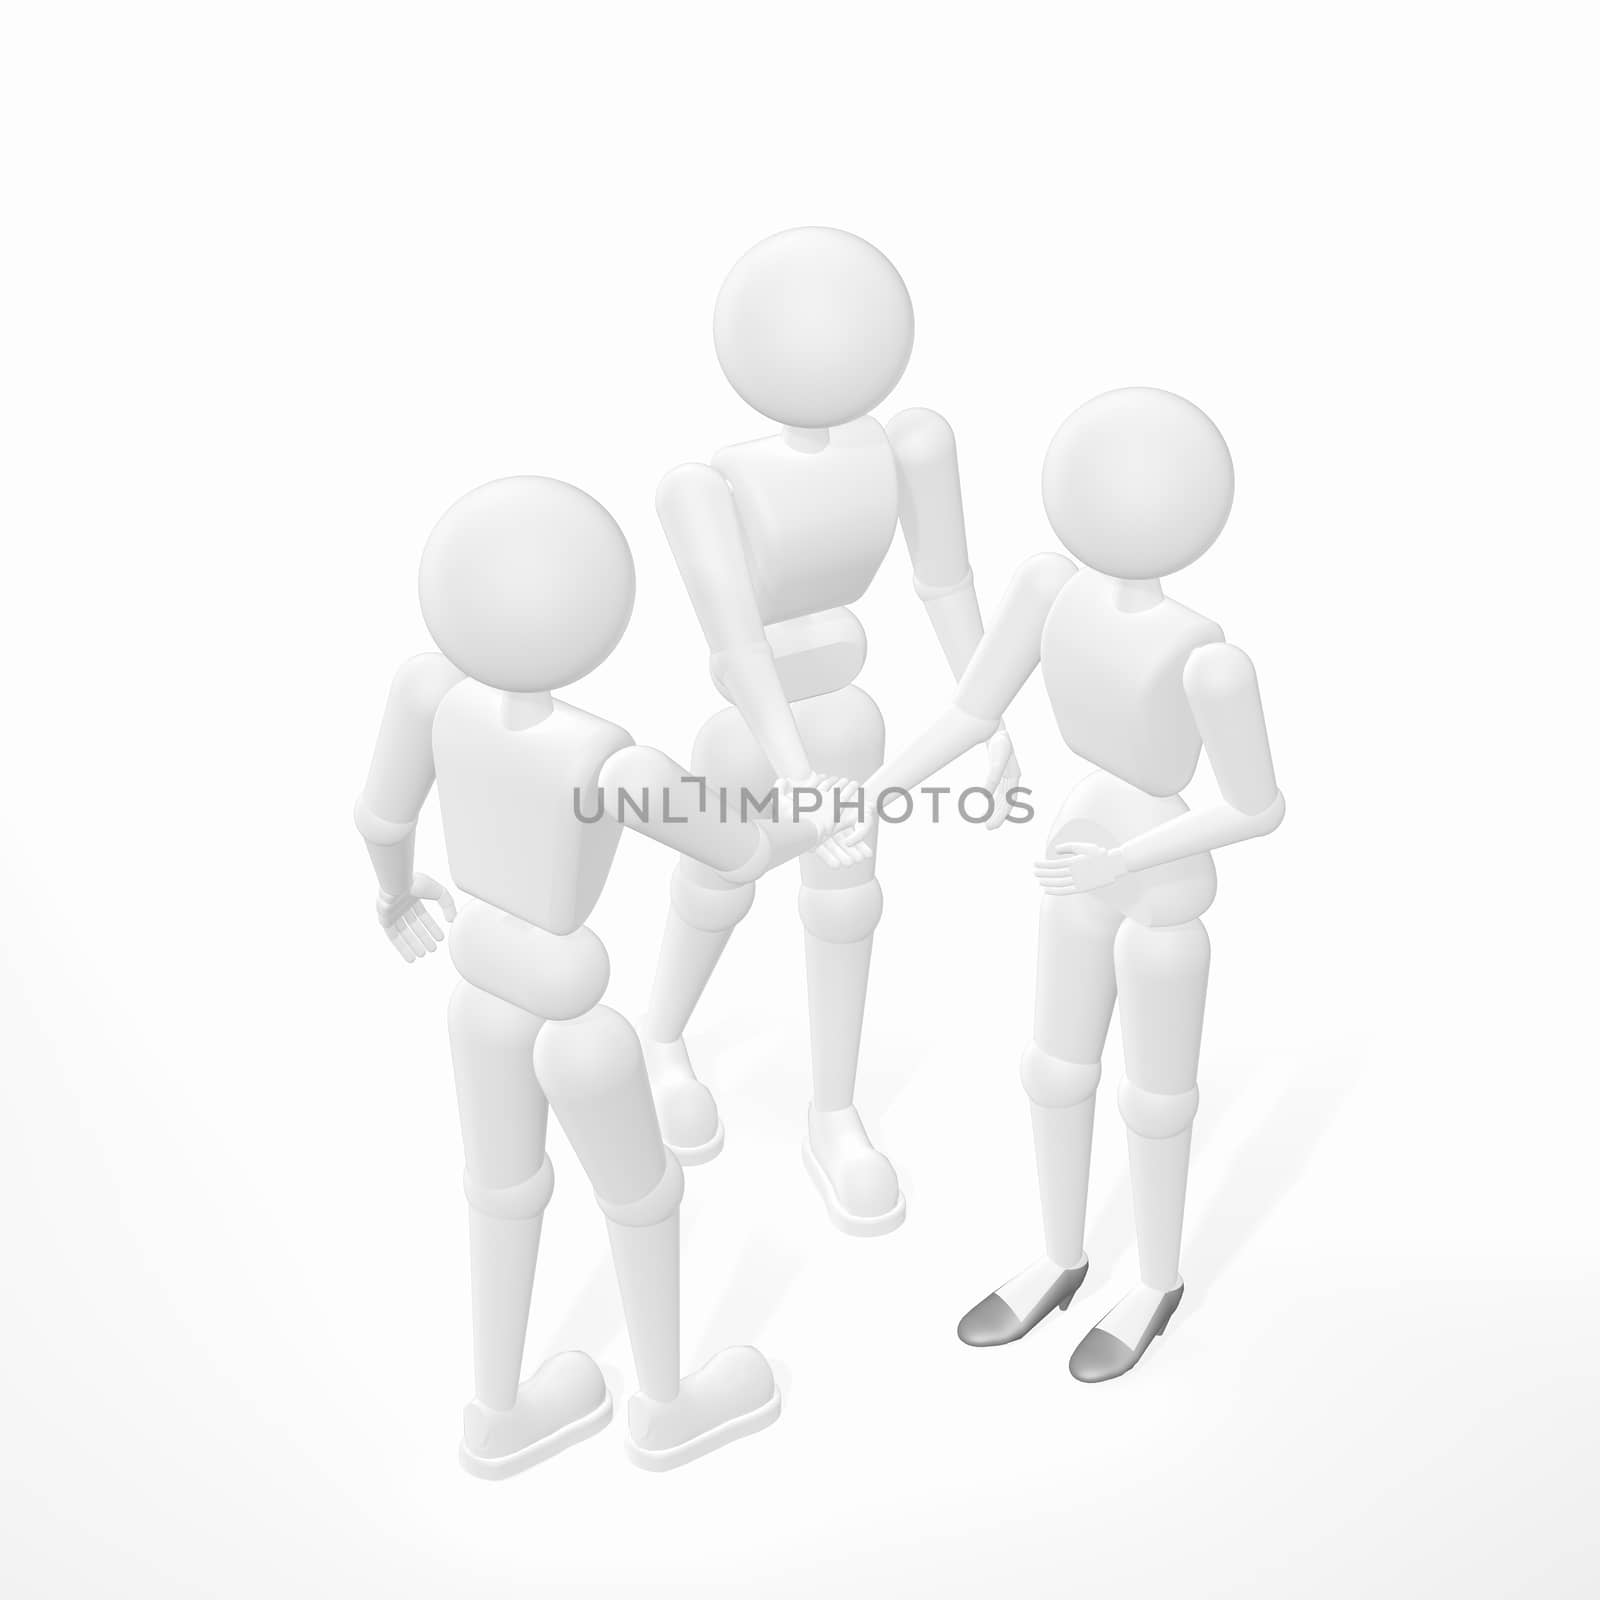 3d - illustration, model of human behavior, concept - business team from three models joining hands, semi isolated with soft shadow, white background